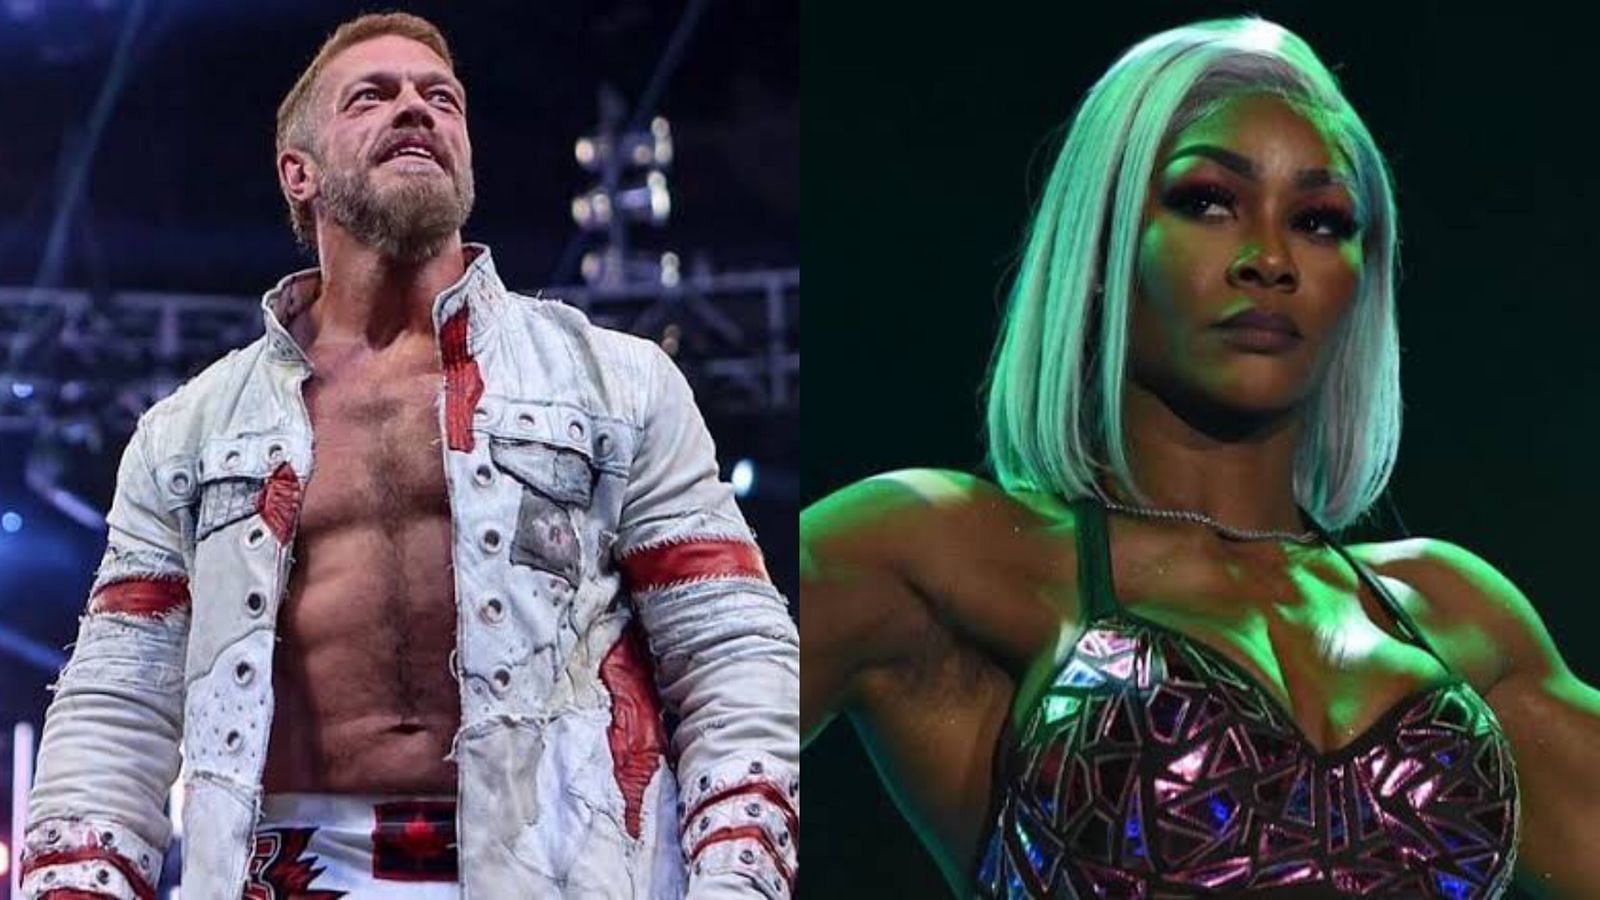 The Rated R Superstar is expected to sign with AEW